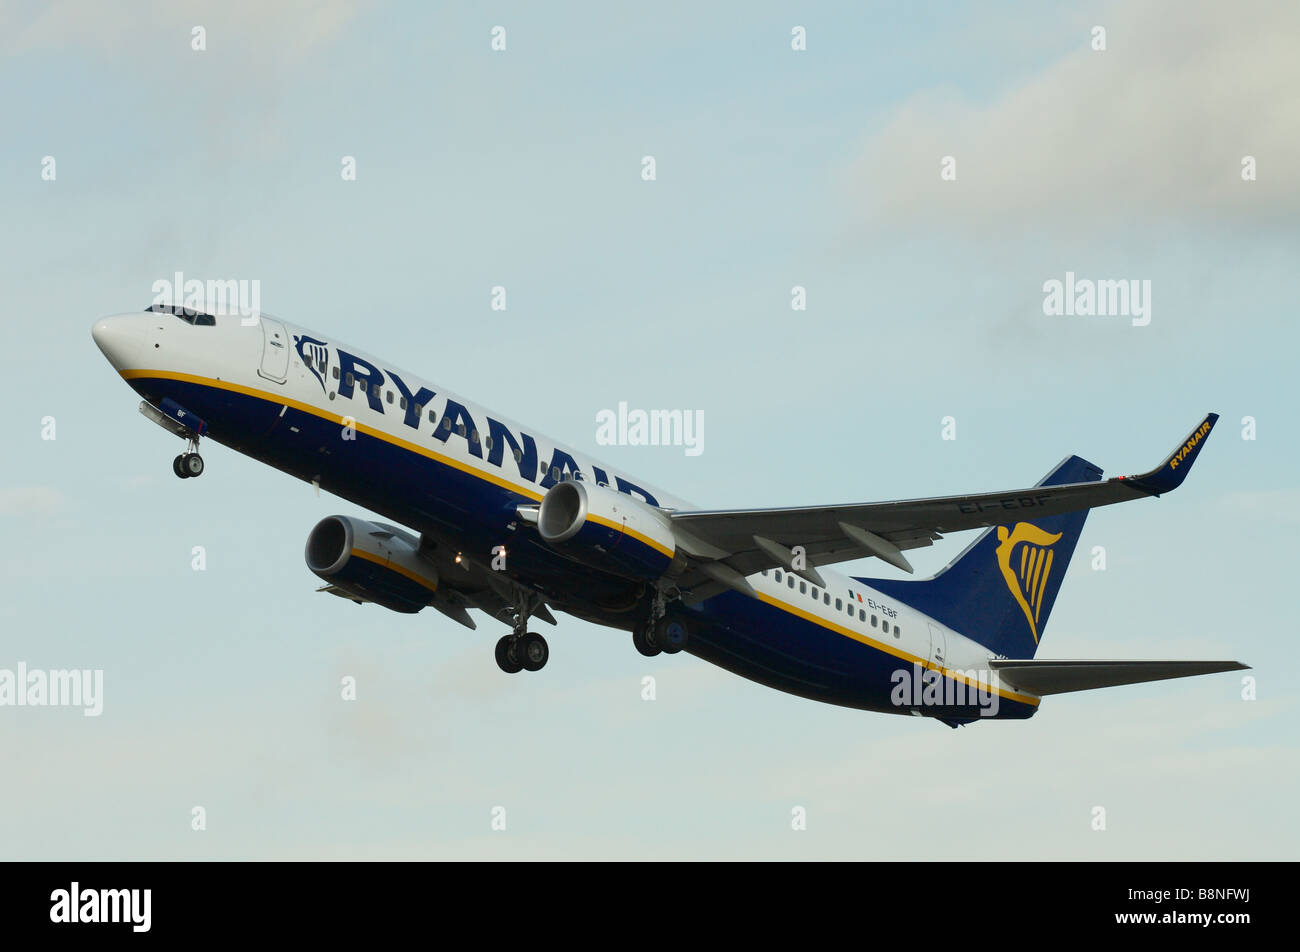 Ryanair Boeing 737 low cost carrier jet plane taking off Stock Photo